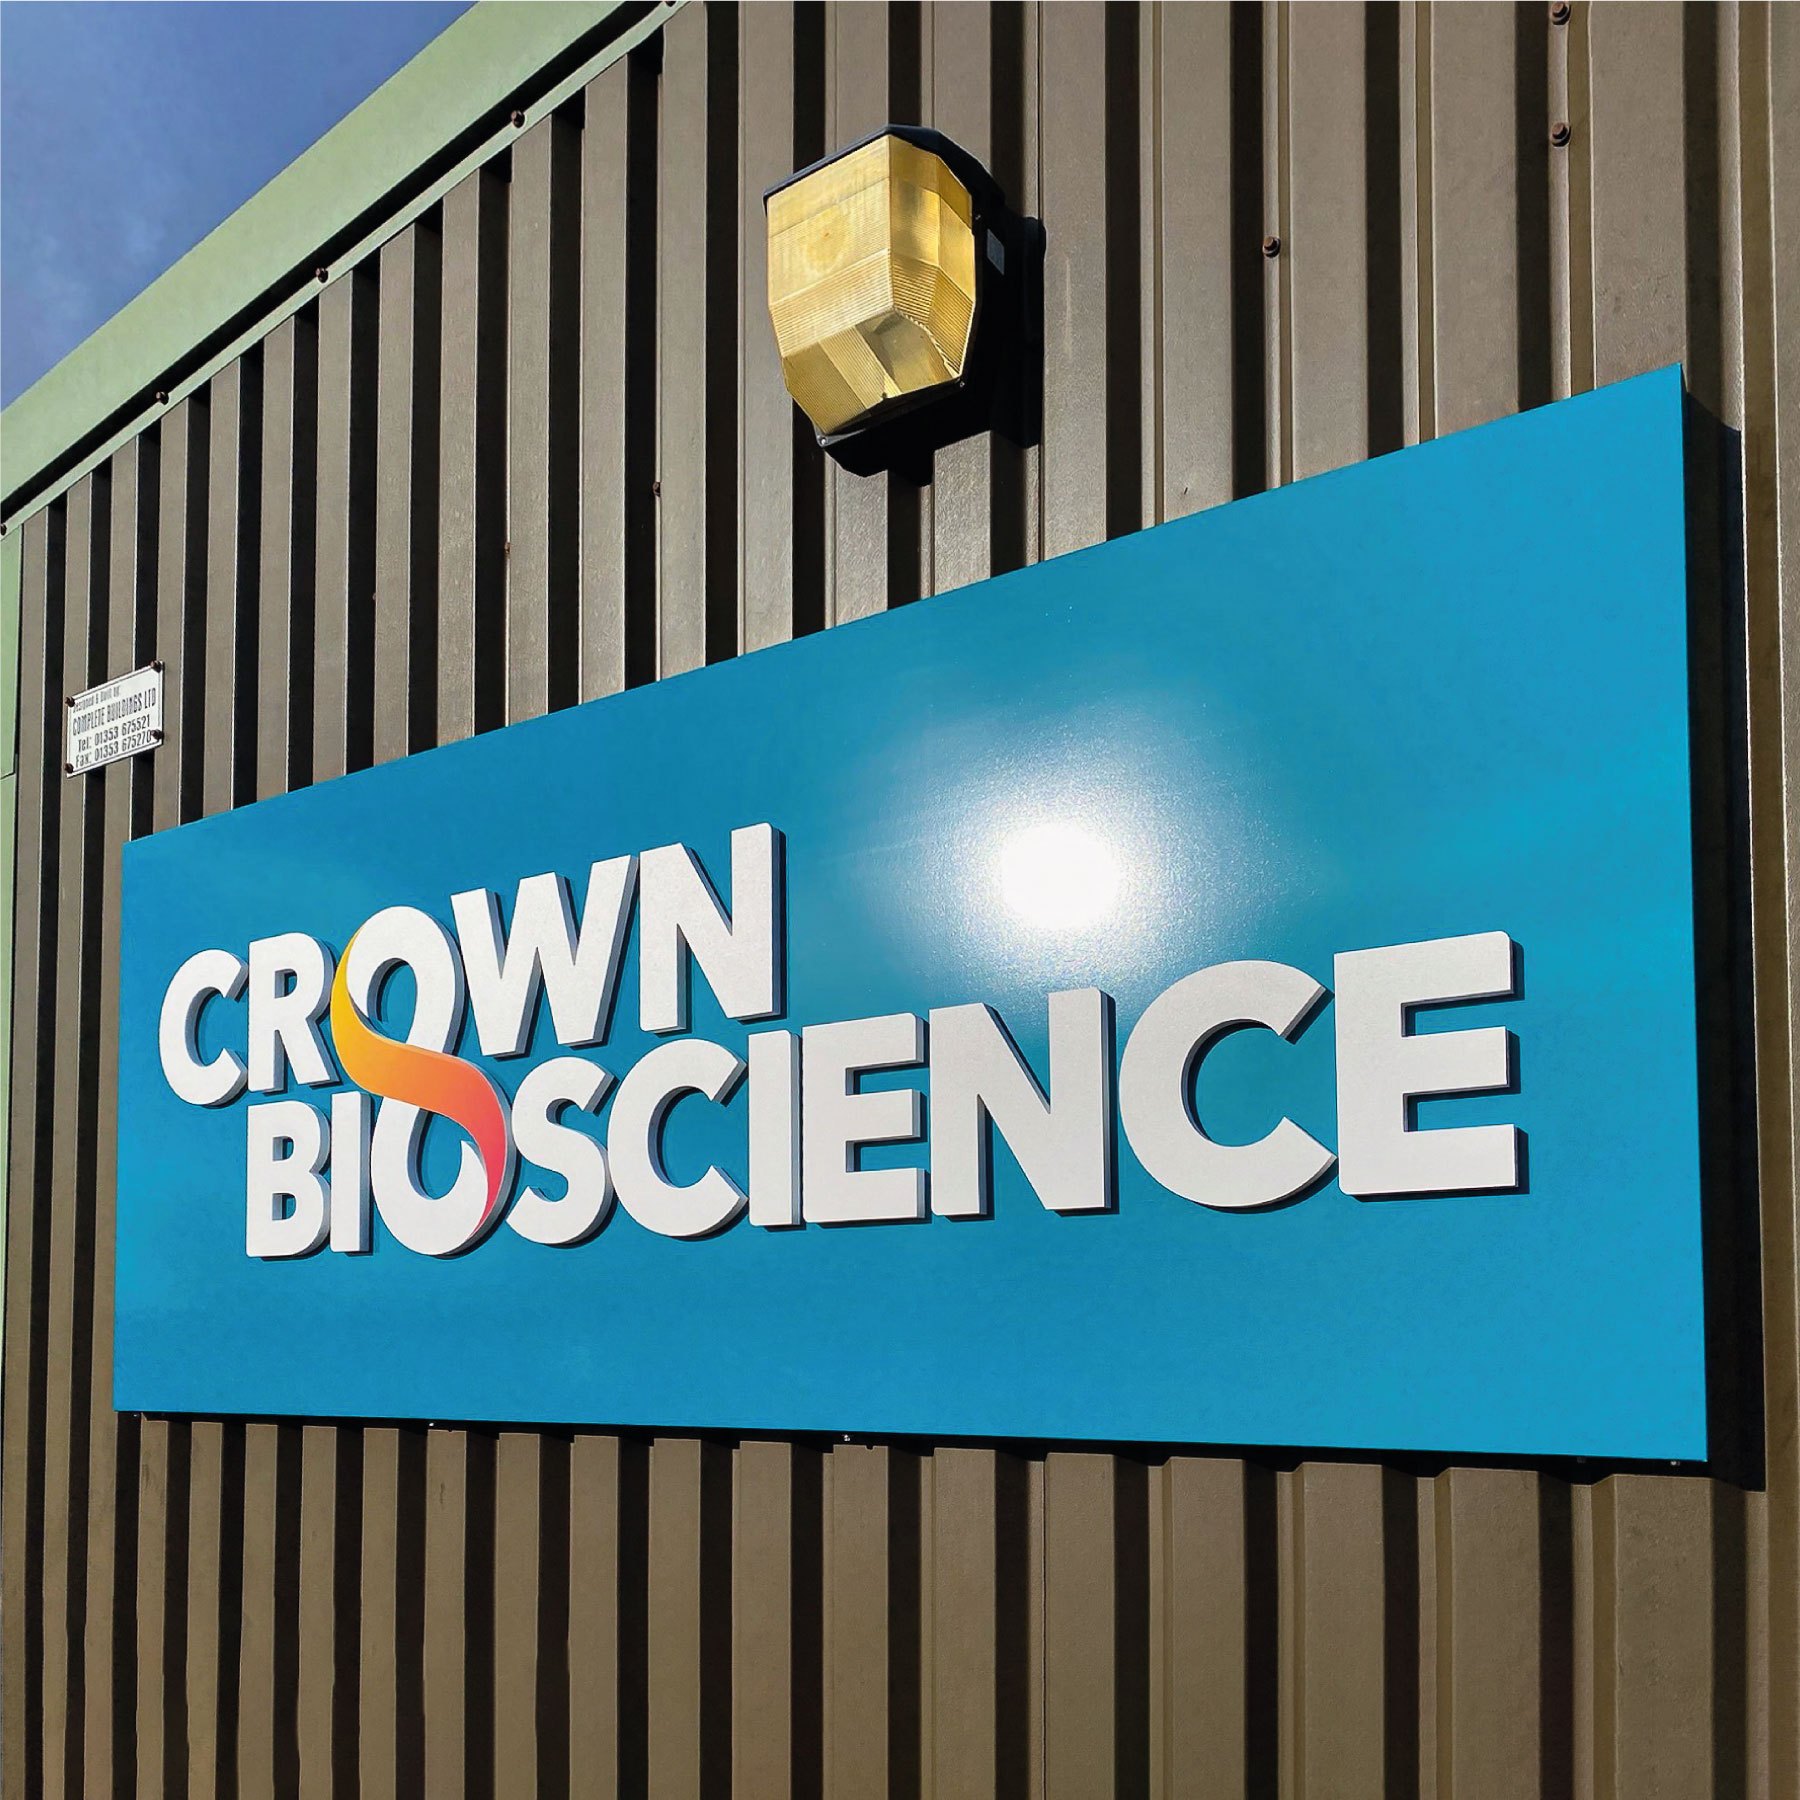 Crown Bioscience written in white 3D letters on a blue background